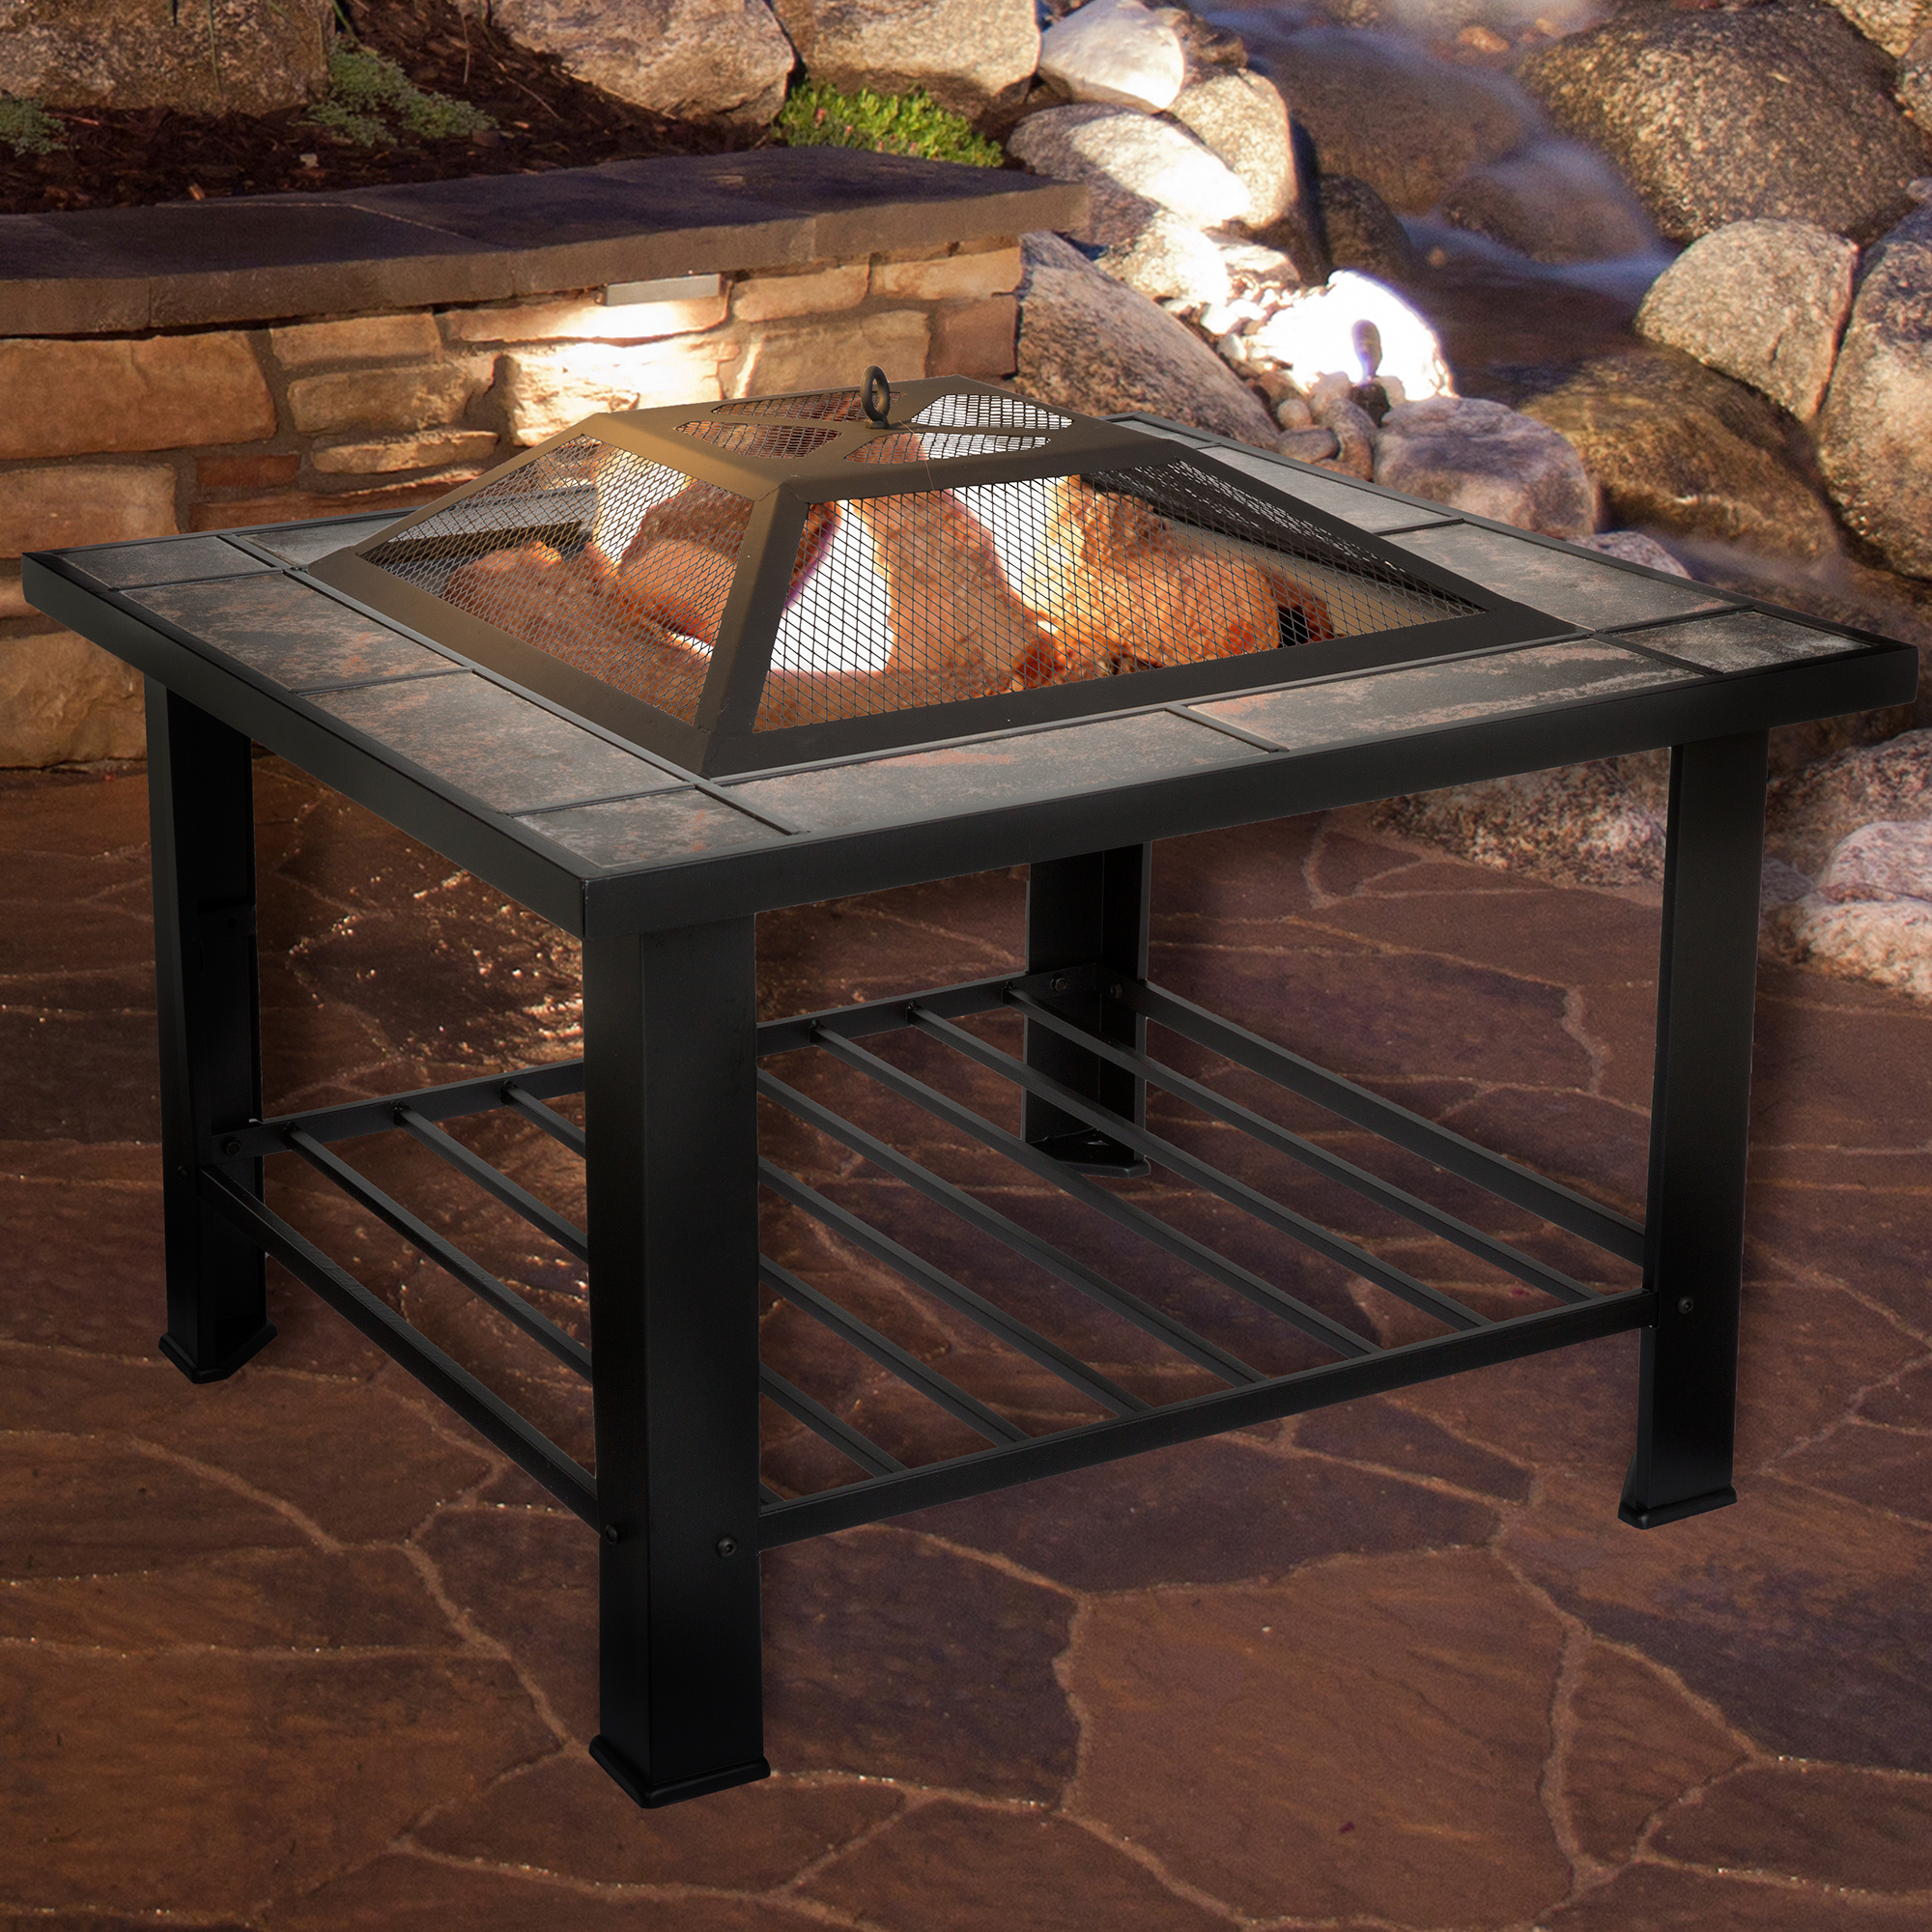 Fire Pit Set, Wood Burning Pit - Includes Screen, Cover and Log Poker - Great for Outdoor and Patio, 30 inch Square Marble Tile Firepit by Pure Garden - image 1 of 4